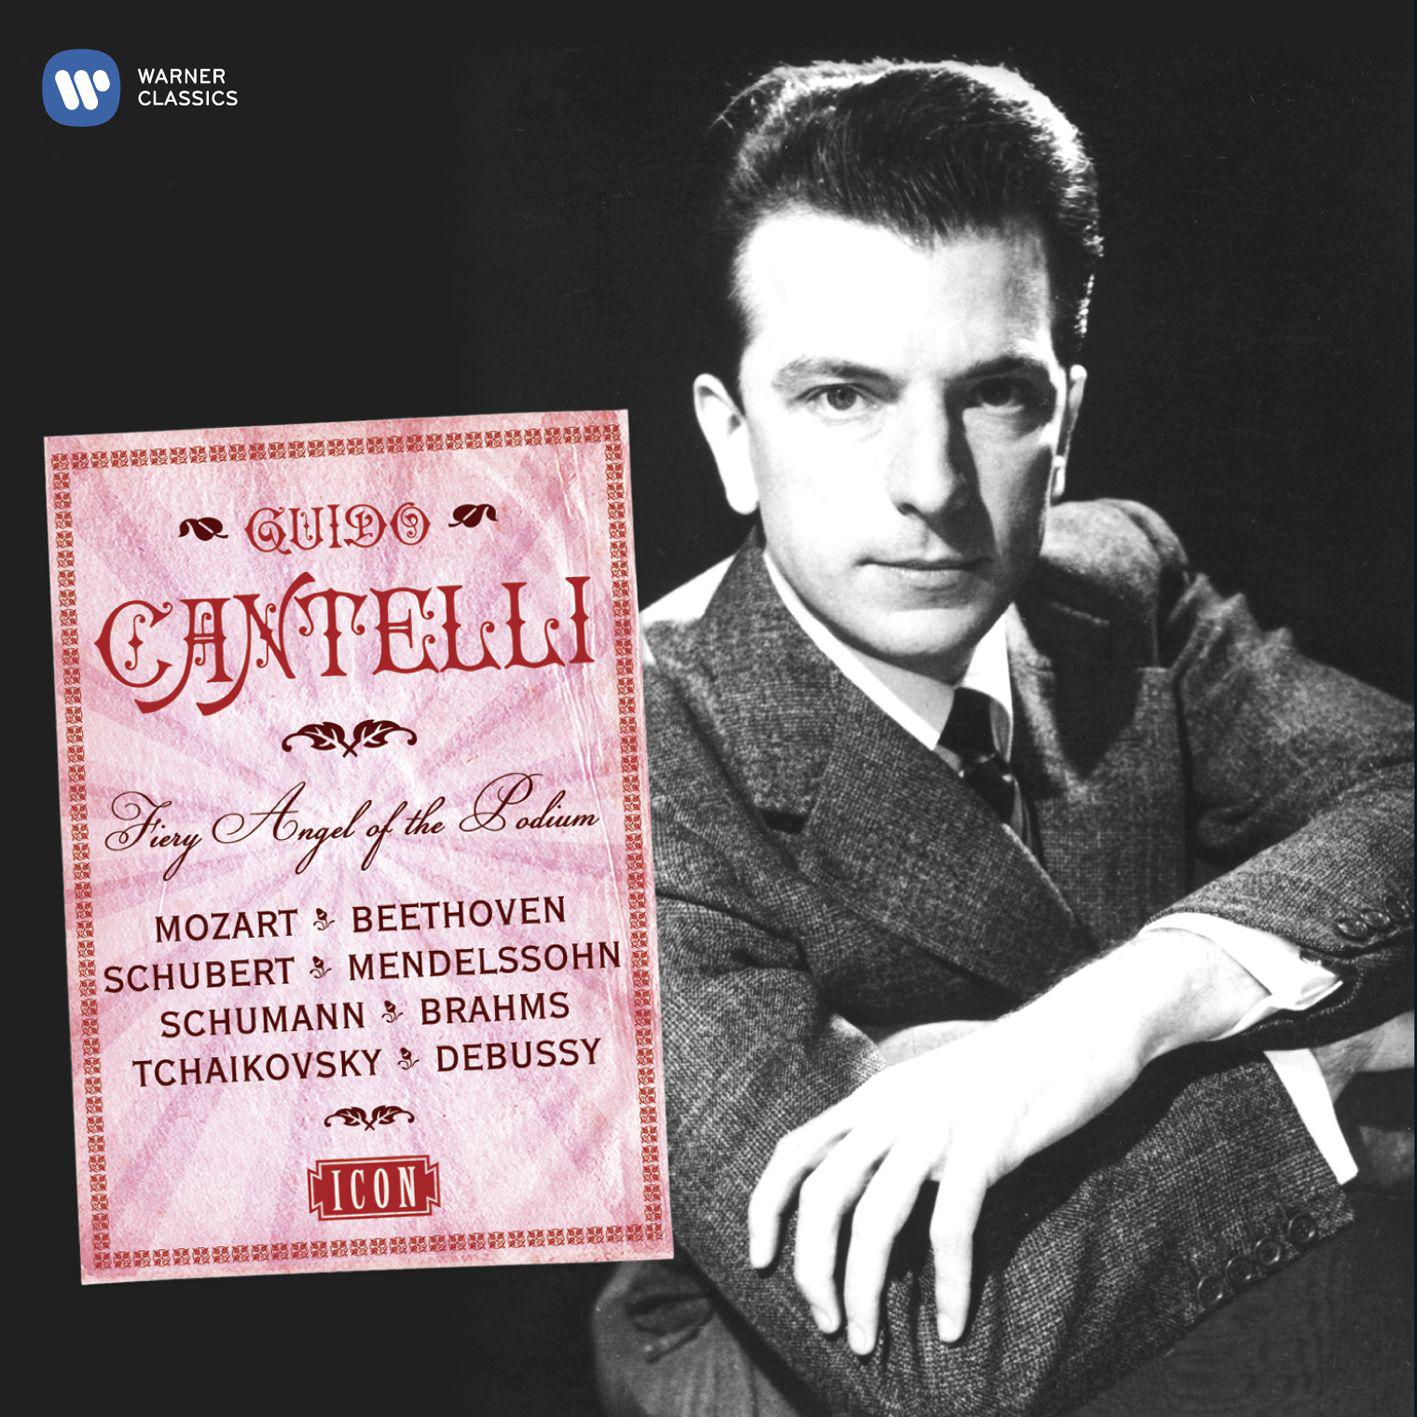 Remembering Guido Cantelli:Cantelli's method at recording sessions - Brahms Symphony No. 3: Finale